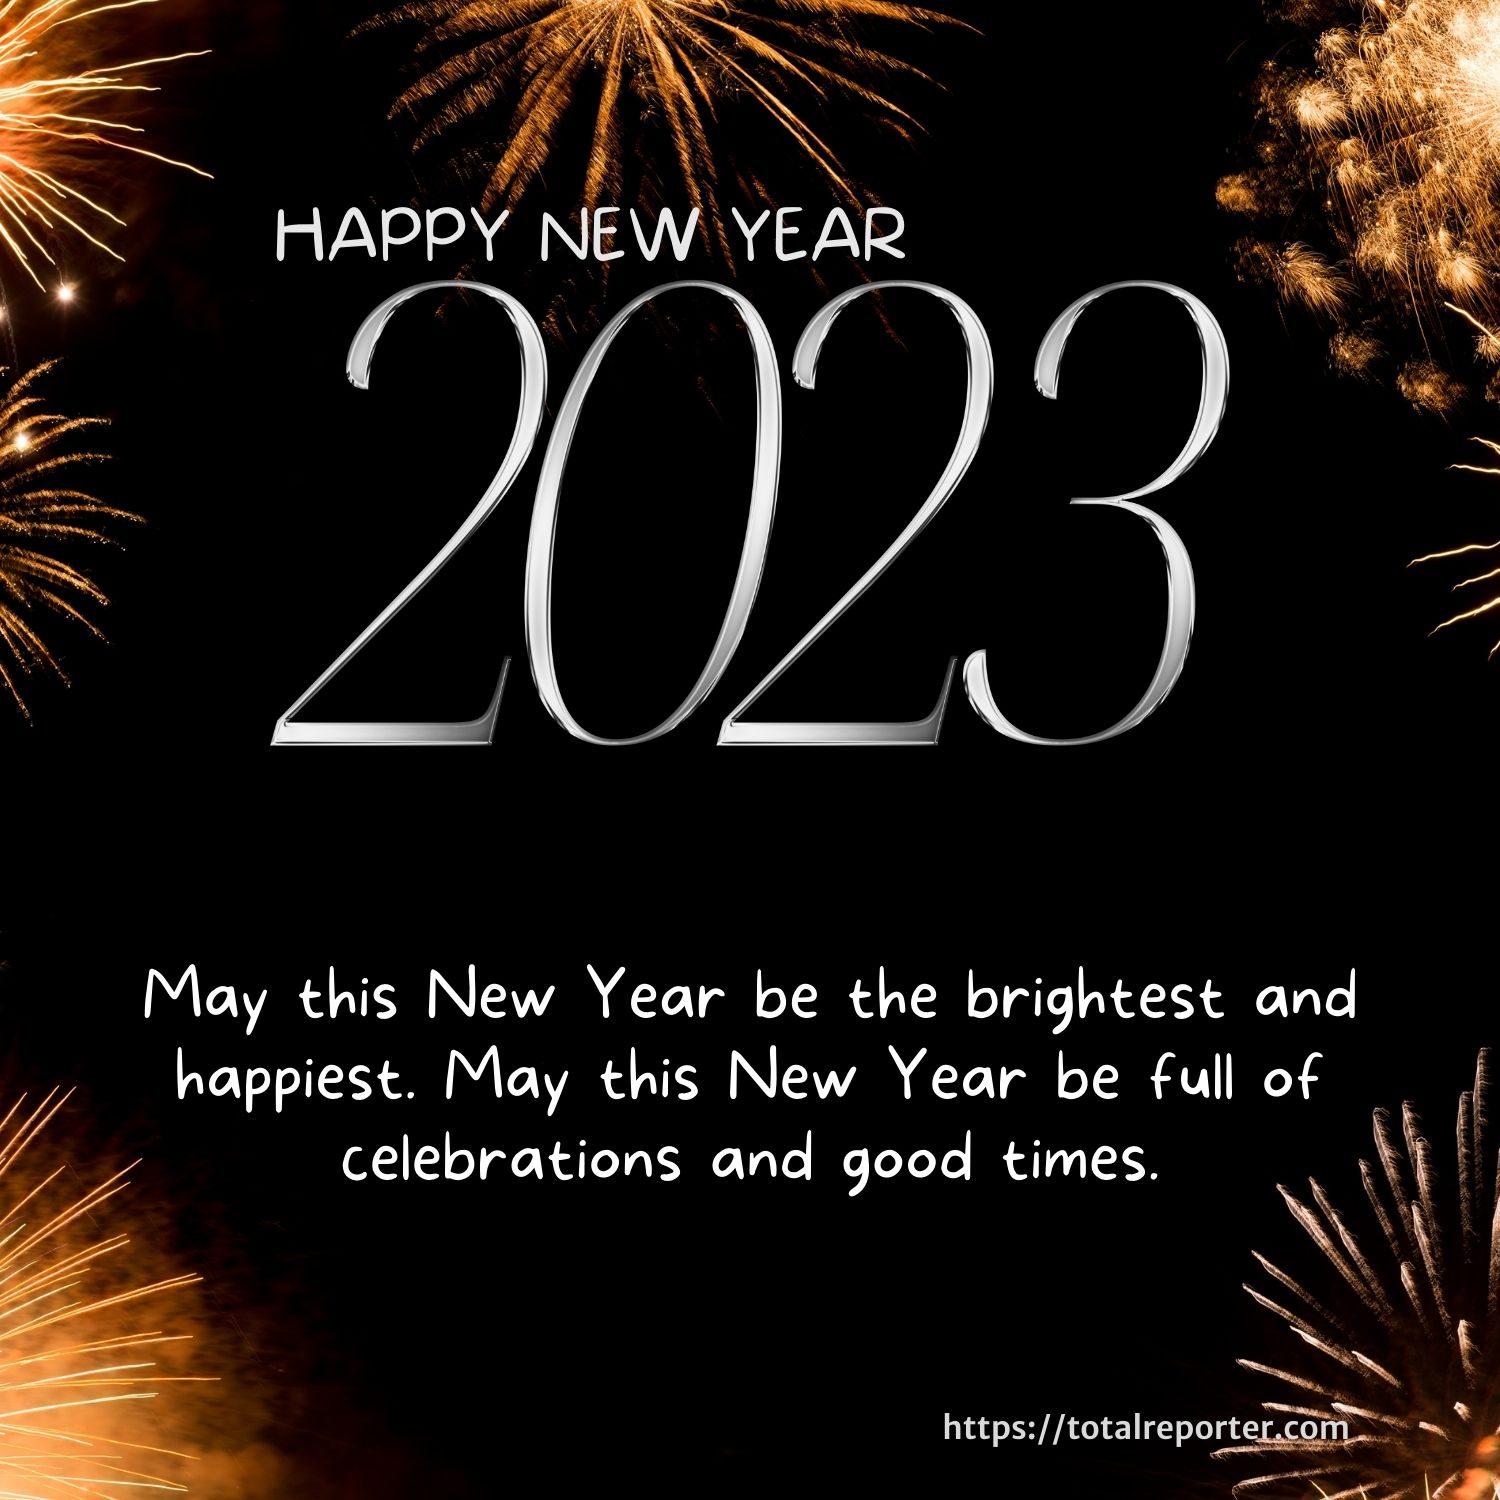 Happy New Year 2023 Images for Facebook